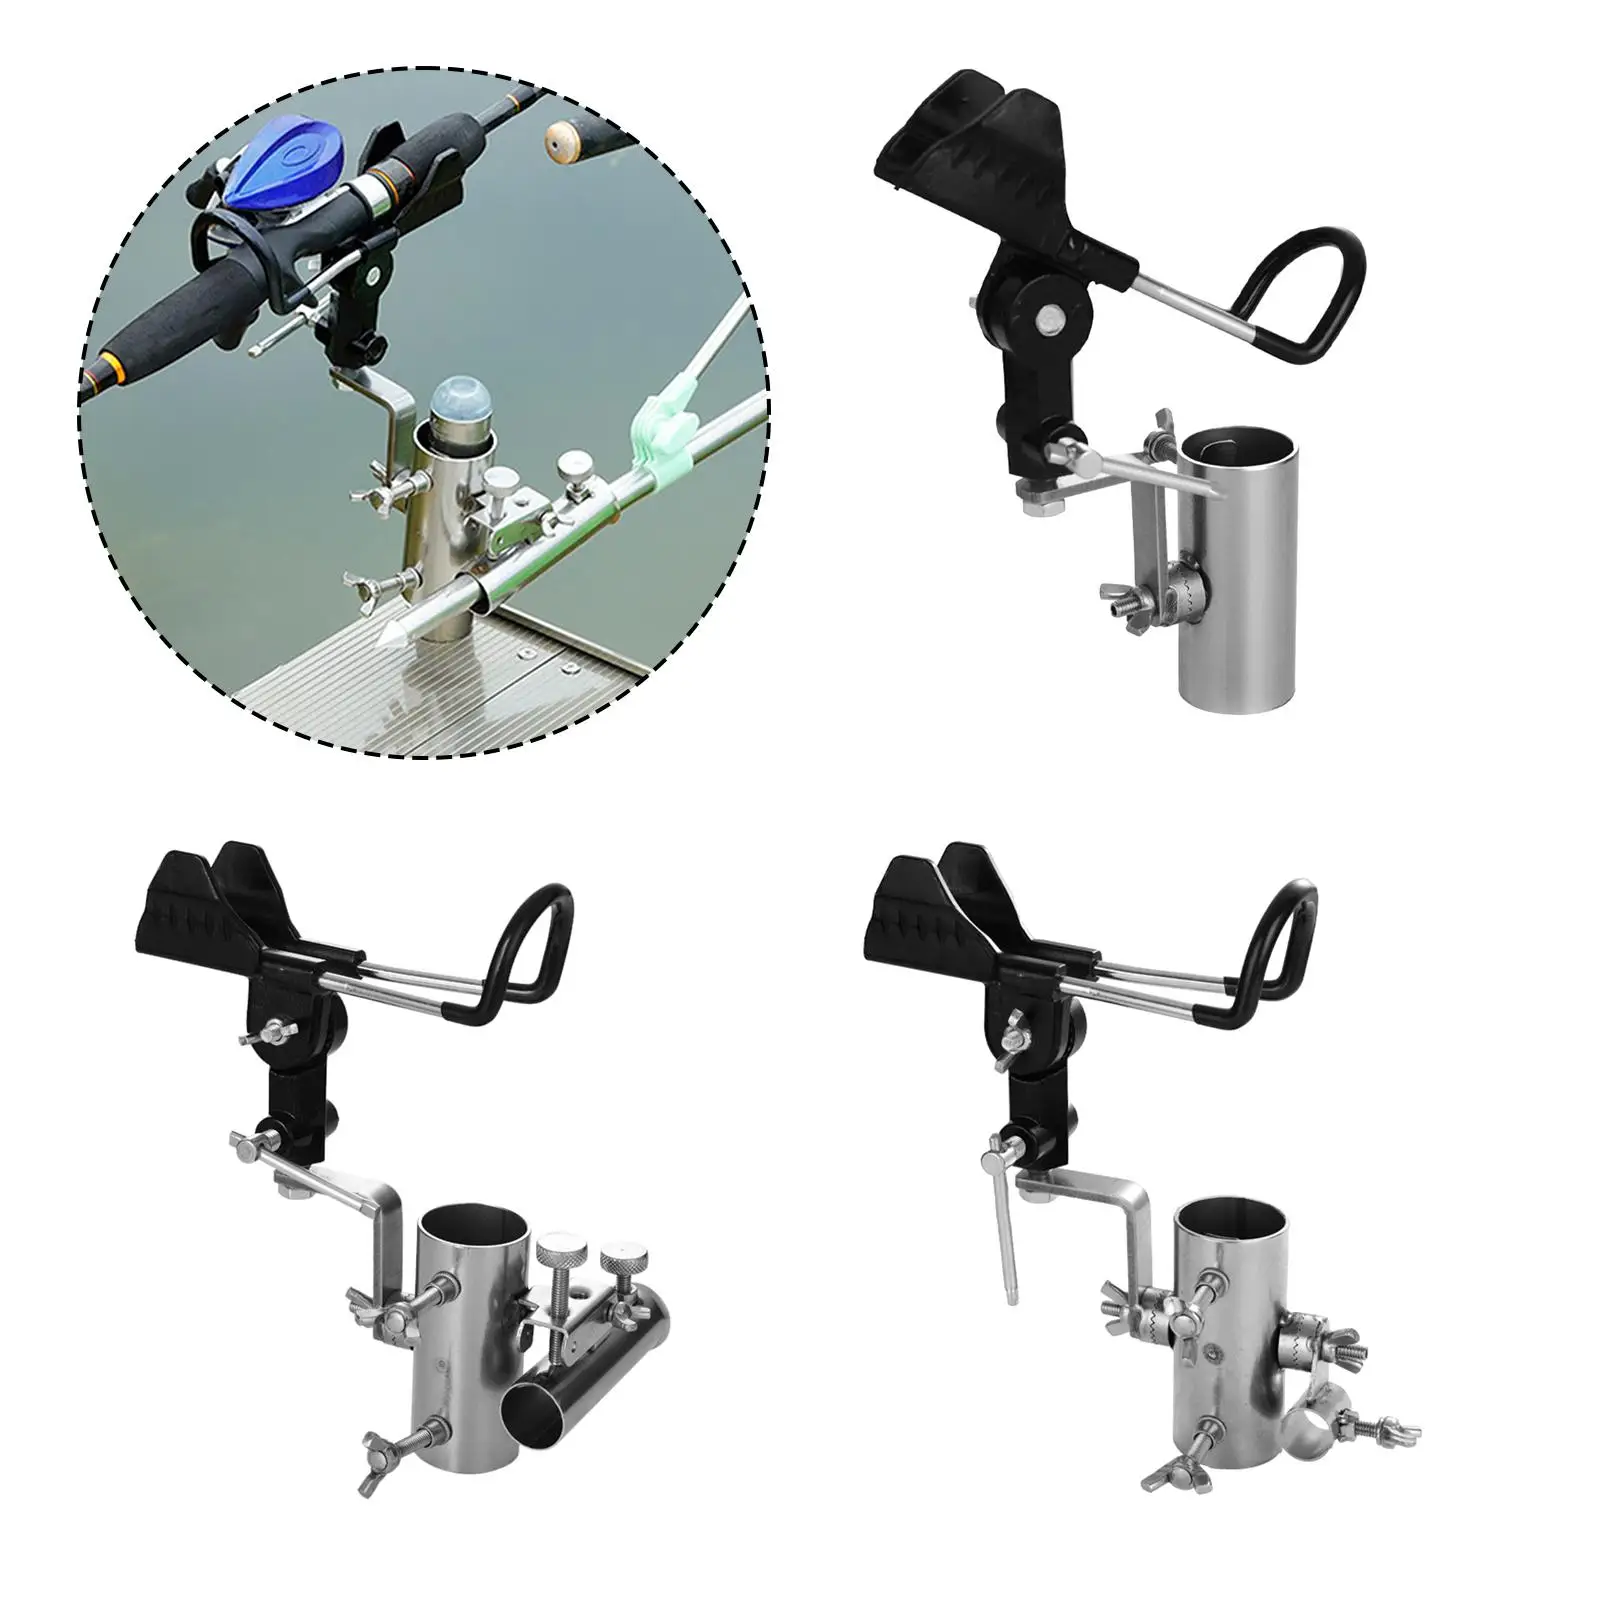 Adjustable Sea Fishing Pole Bracket Tool Metal Stand Support Portable Lightweight Universal Fishing Rod Holder for Outdoor